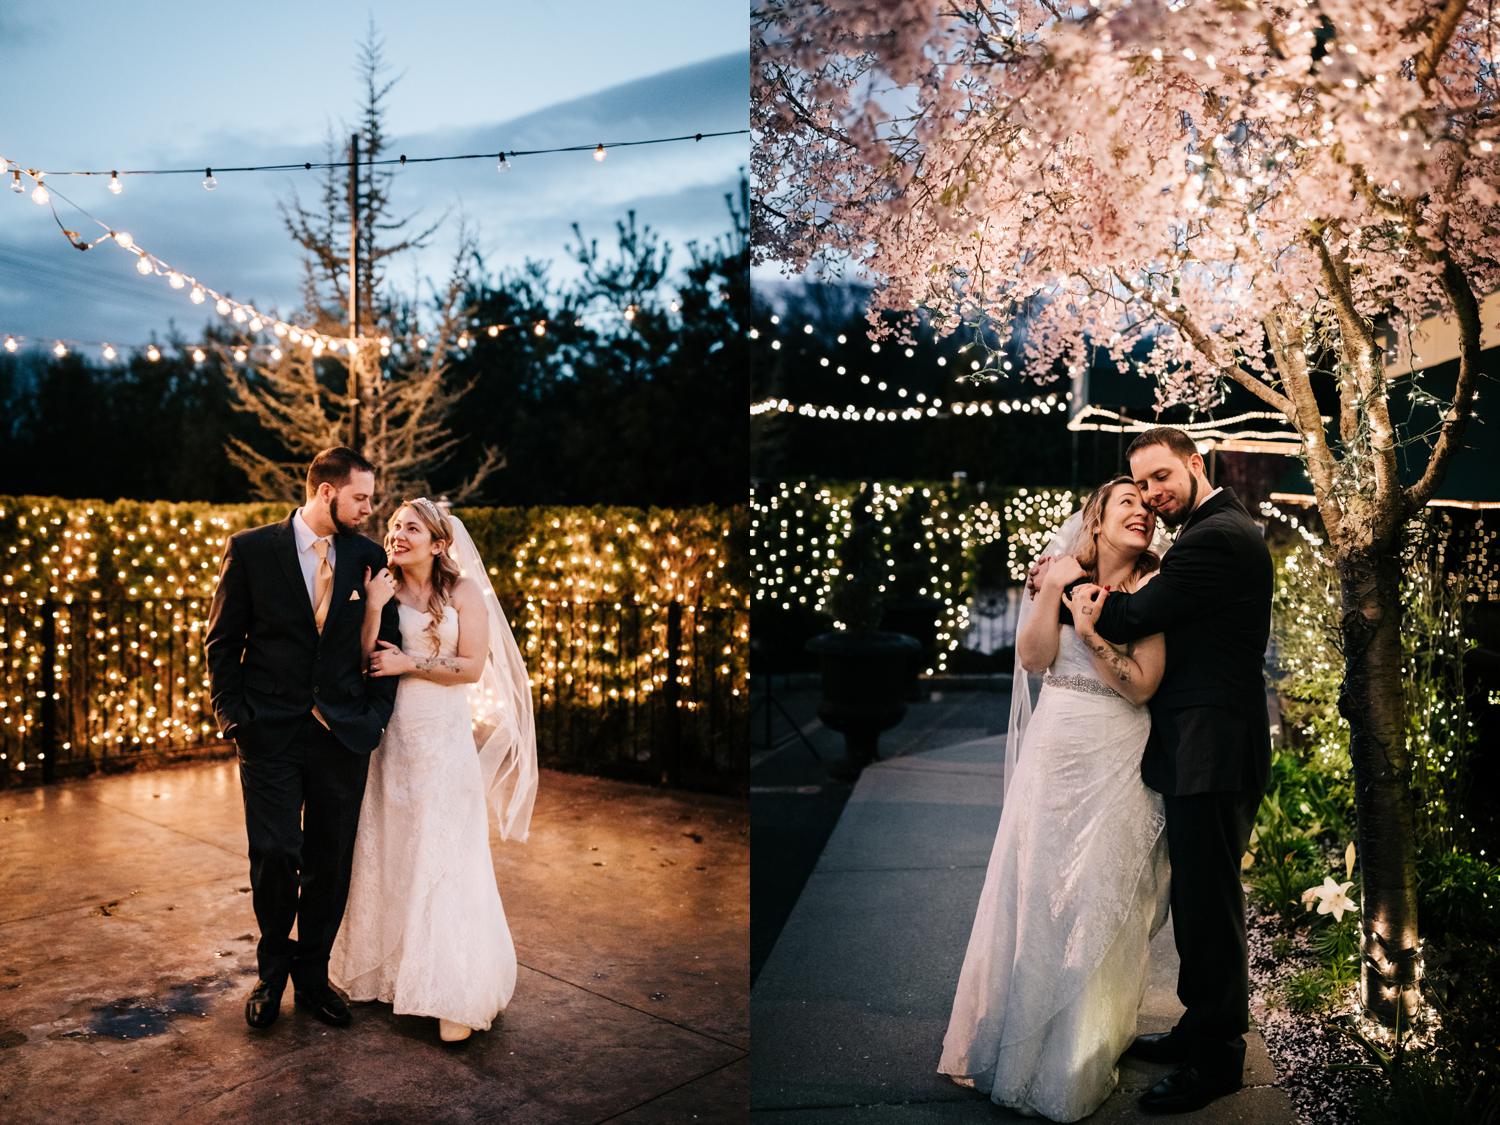 Bride and groom surrounded by twinkle lights outdoors at night